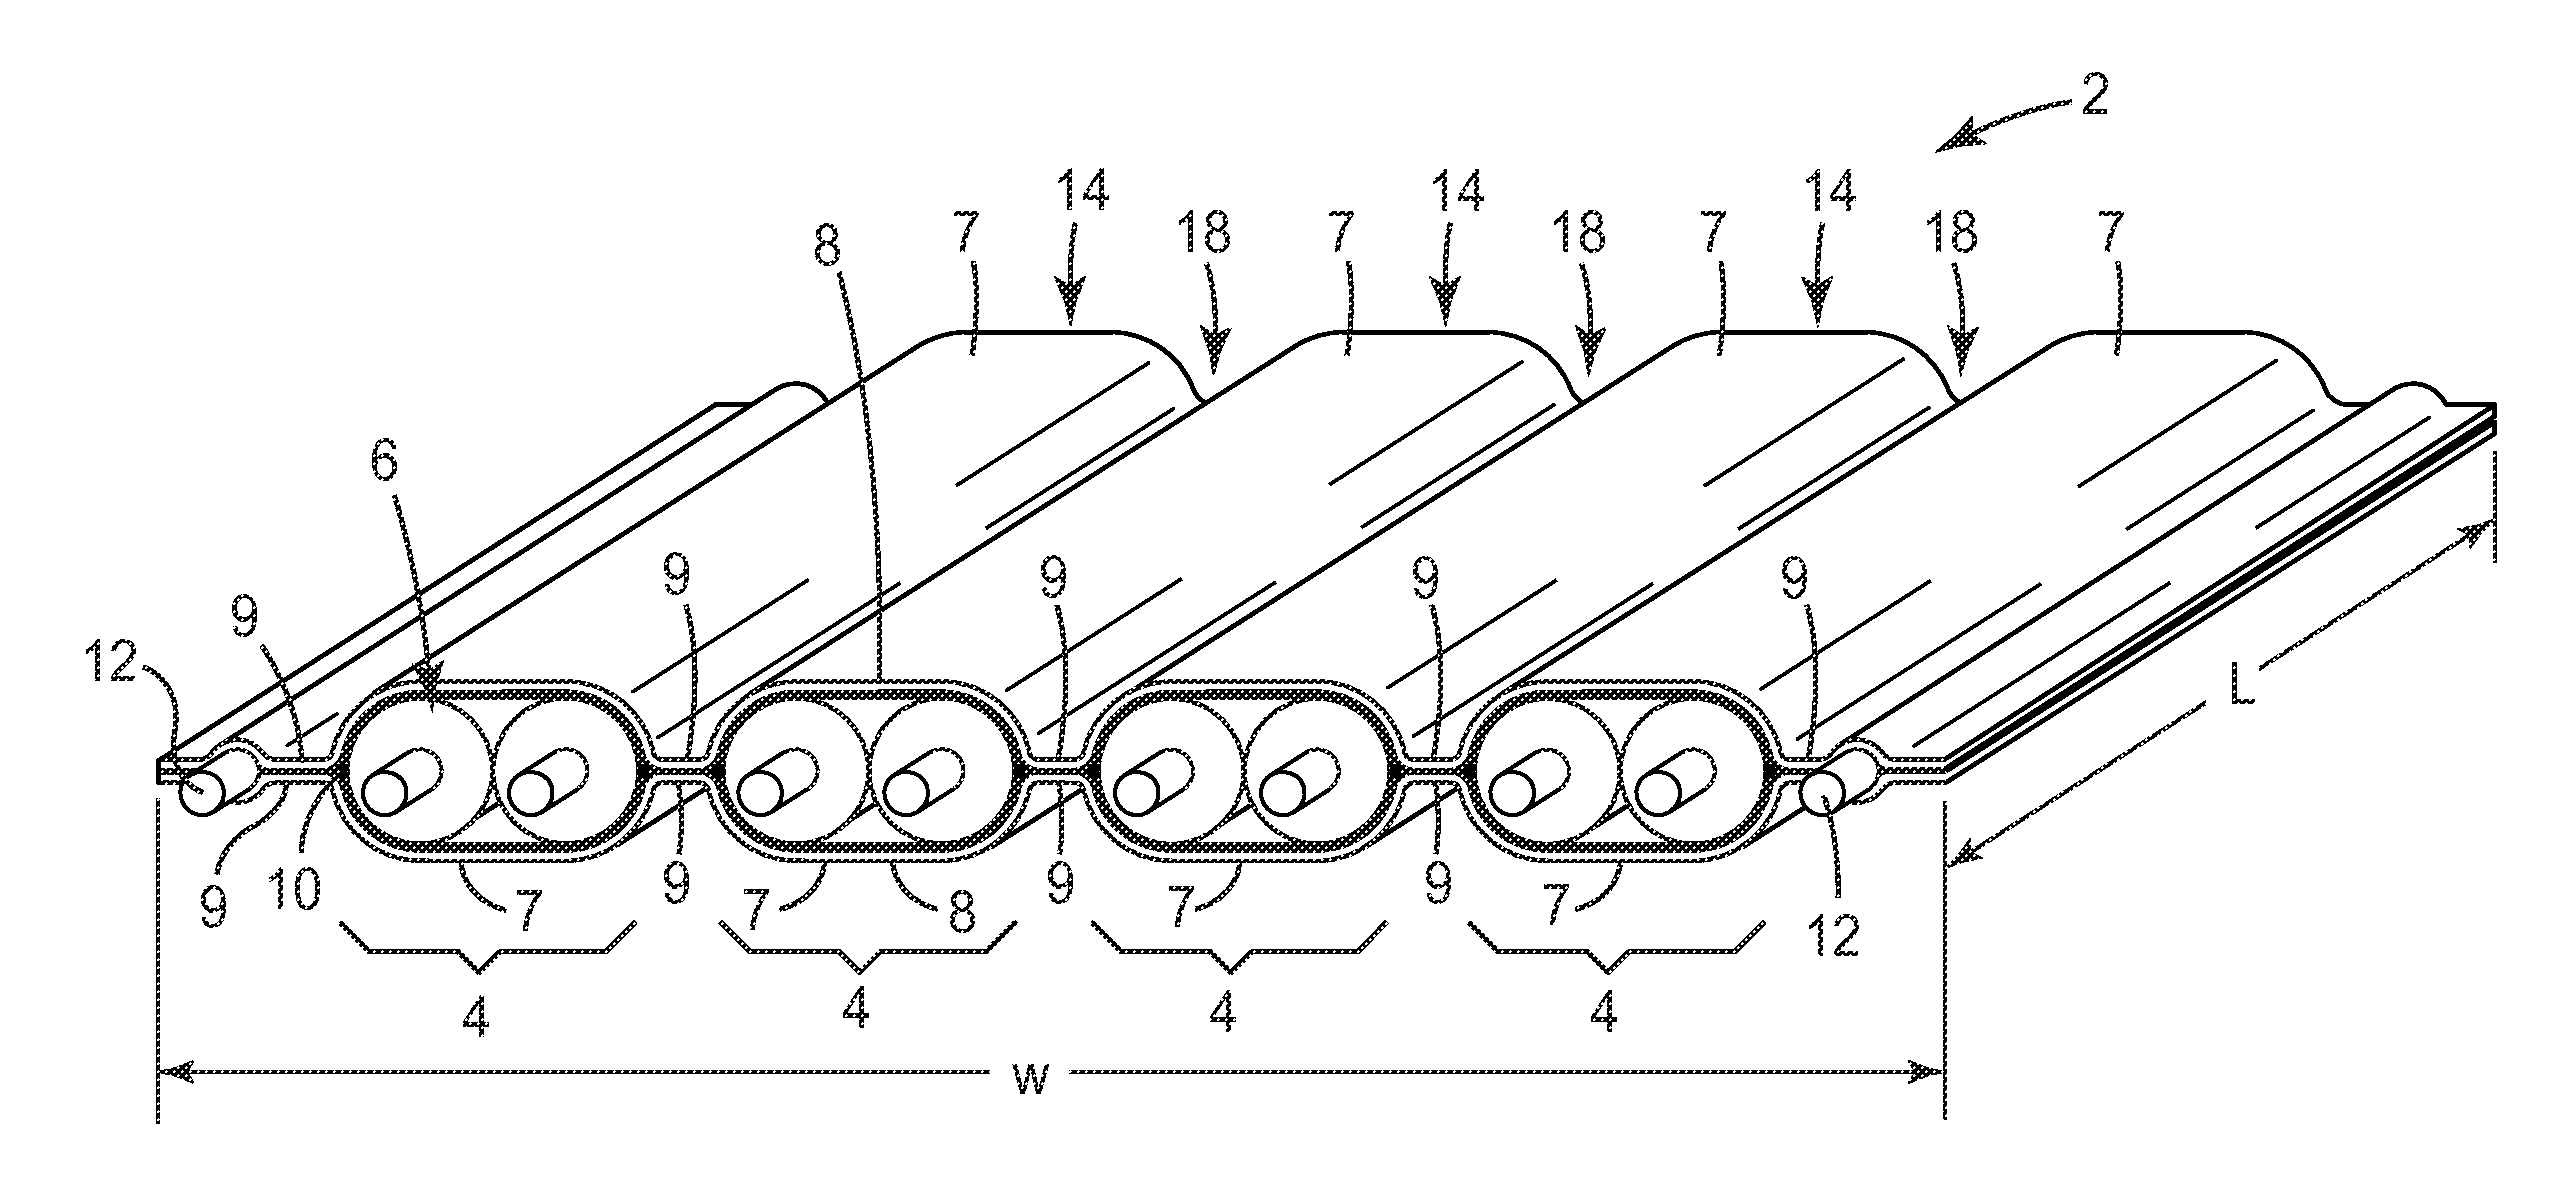 High density shielded electrical cable and other shielded cables, systems, and methods